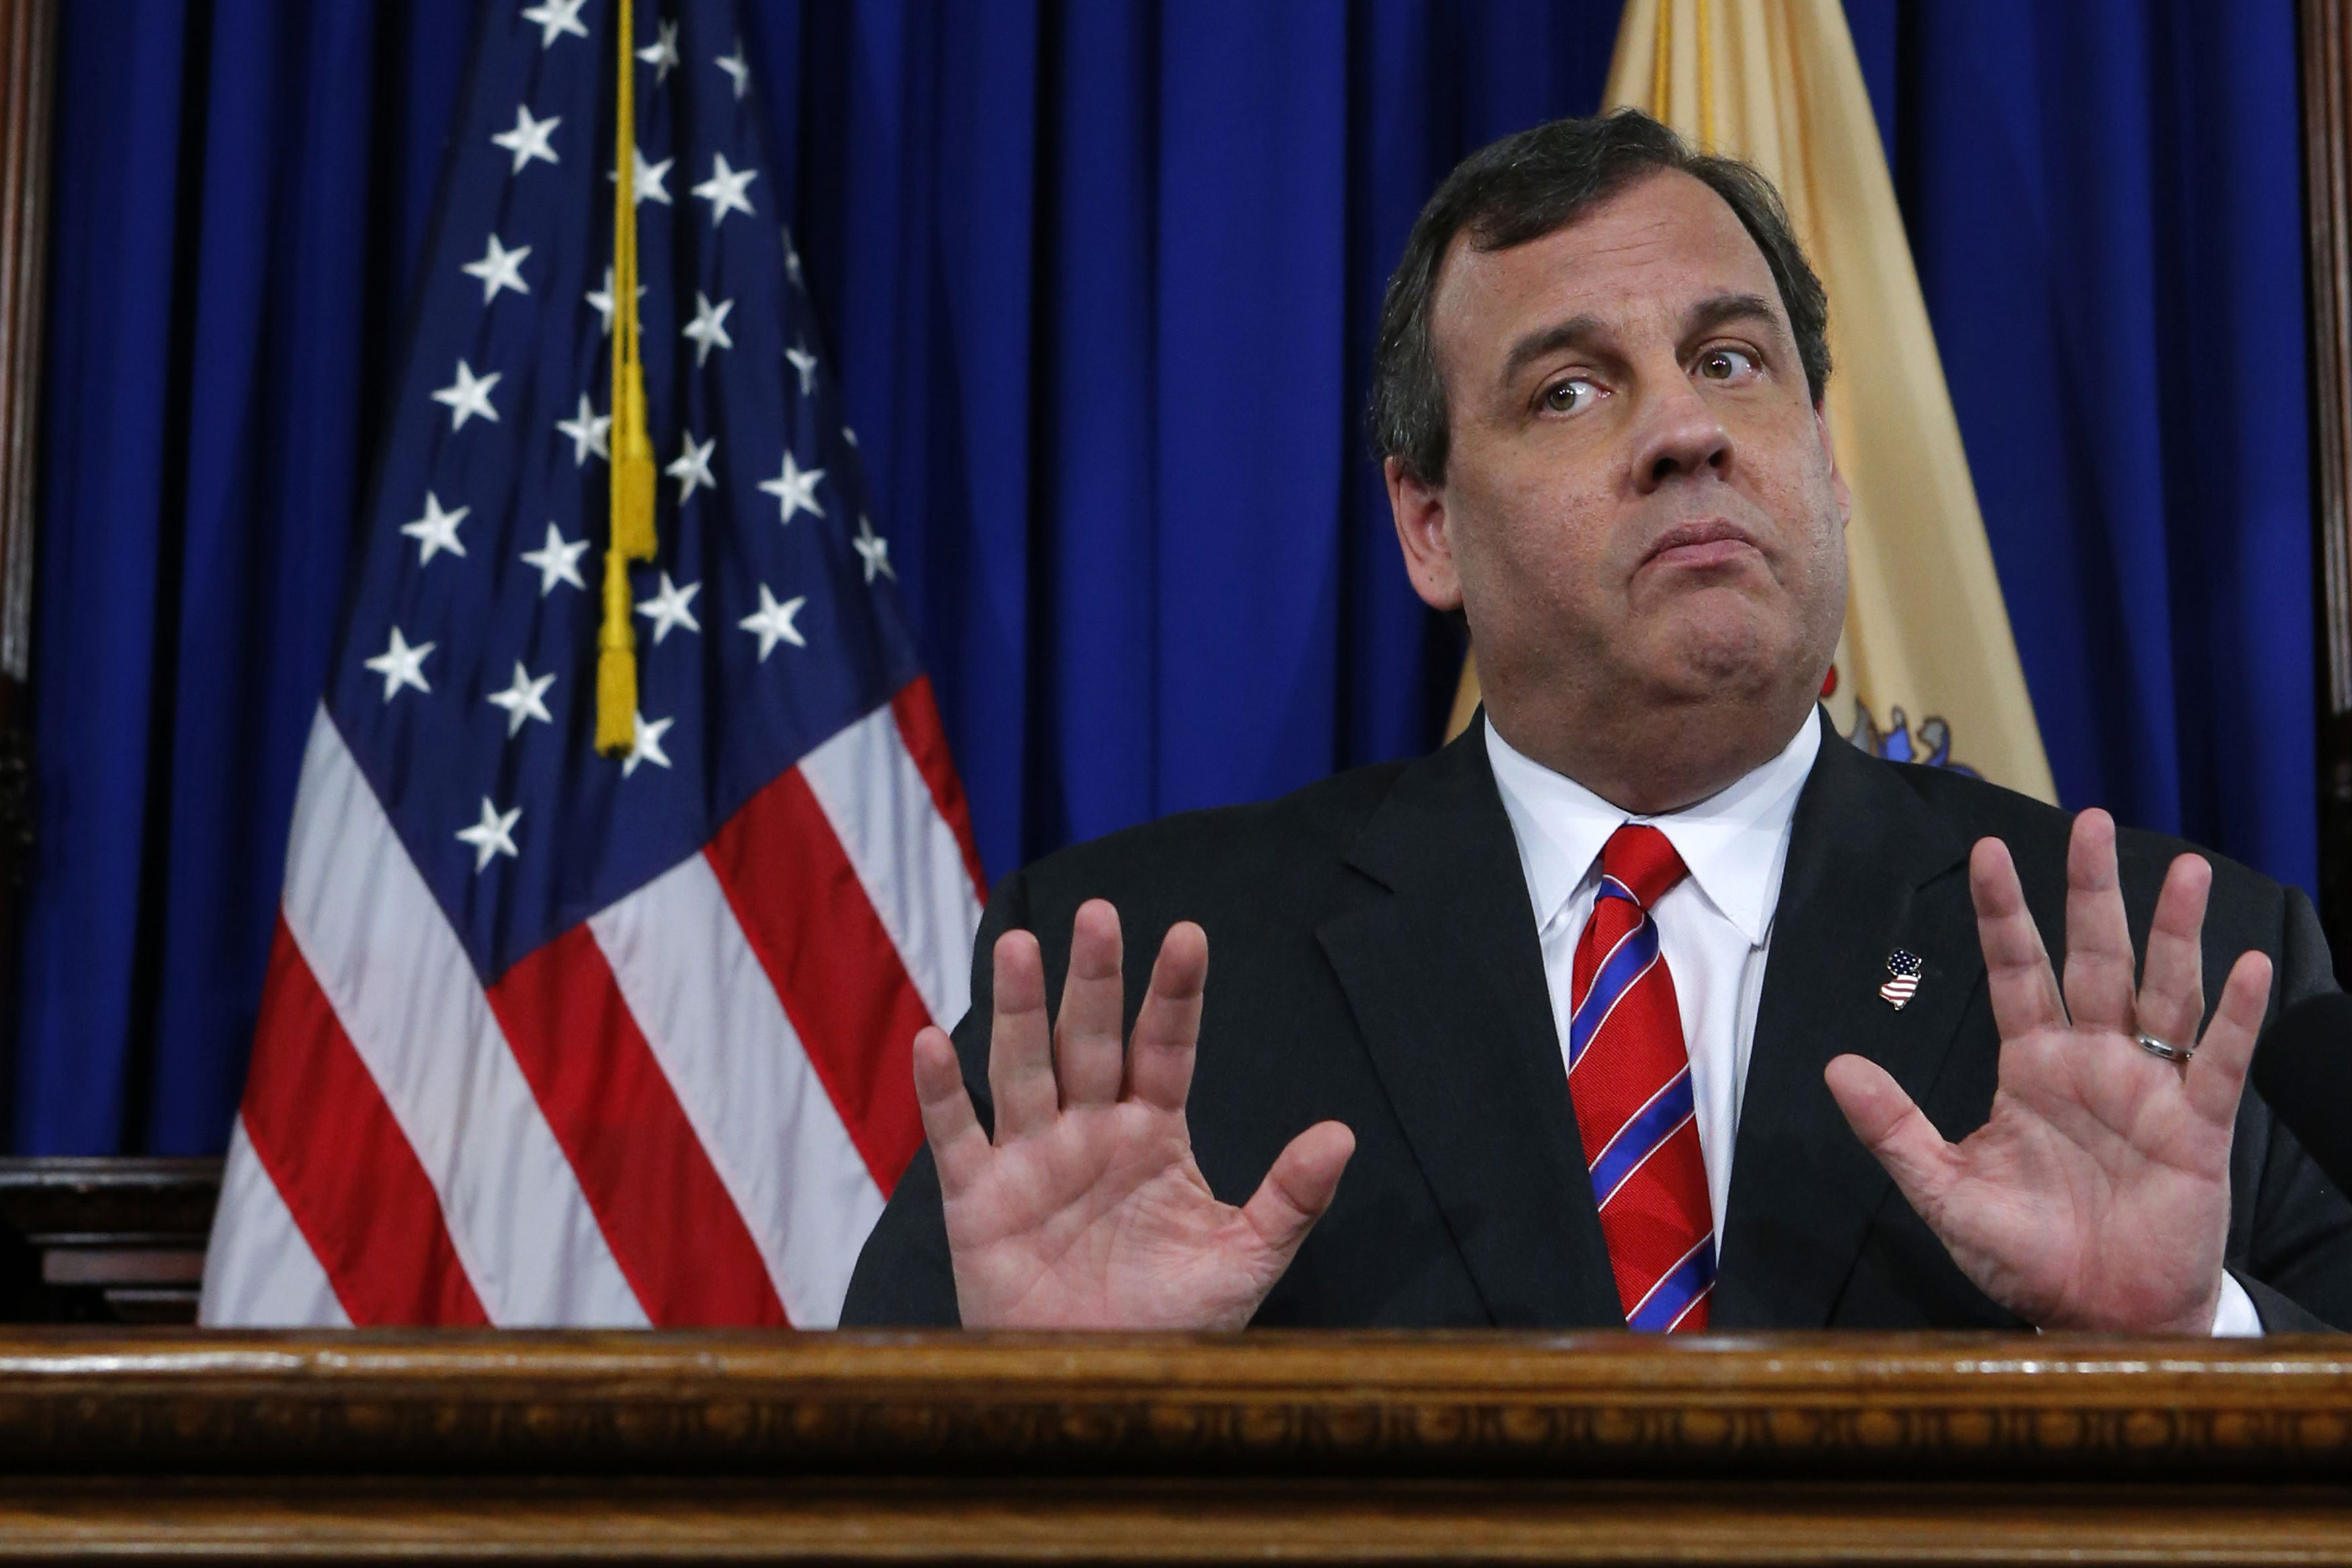 Christie’s Gun Control Veto Sparks Anger in NJ, but May Not Win Over the Tea Party